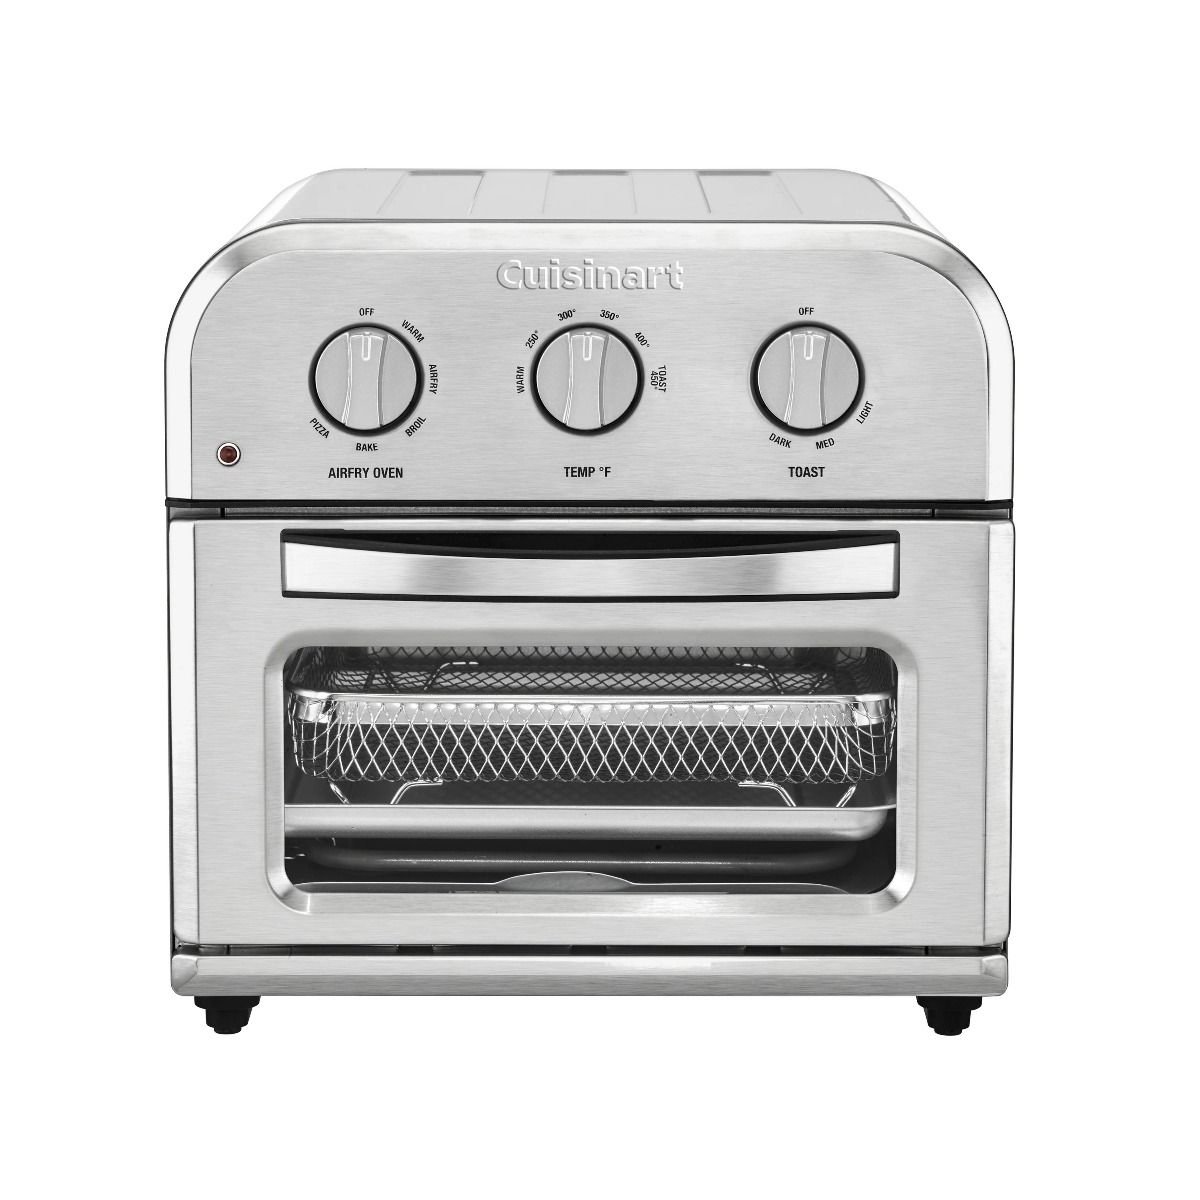 https://cdn.everythingkitchens.com/media/catalog/product/cache/70d878061ea71e5b62358b2b67547186/c/o/compact_airfryer_toaster_oven_in_stainless_steel_1.jpg